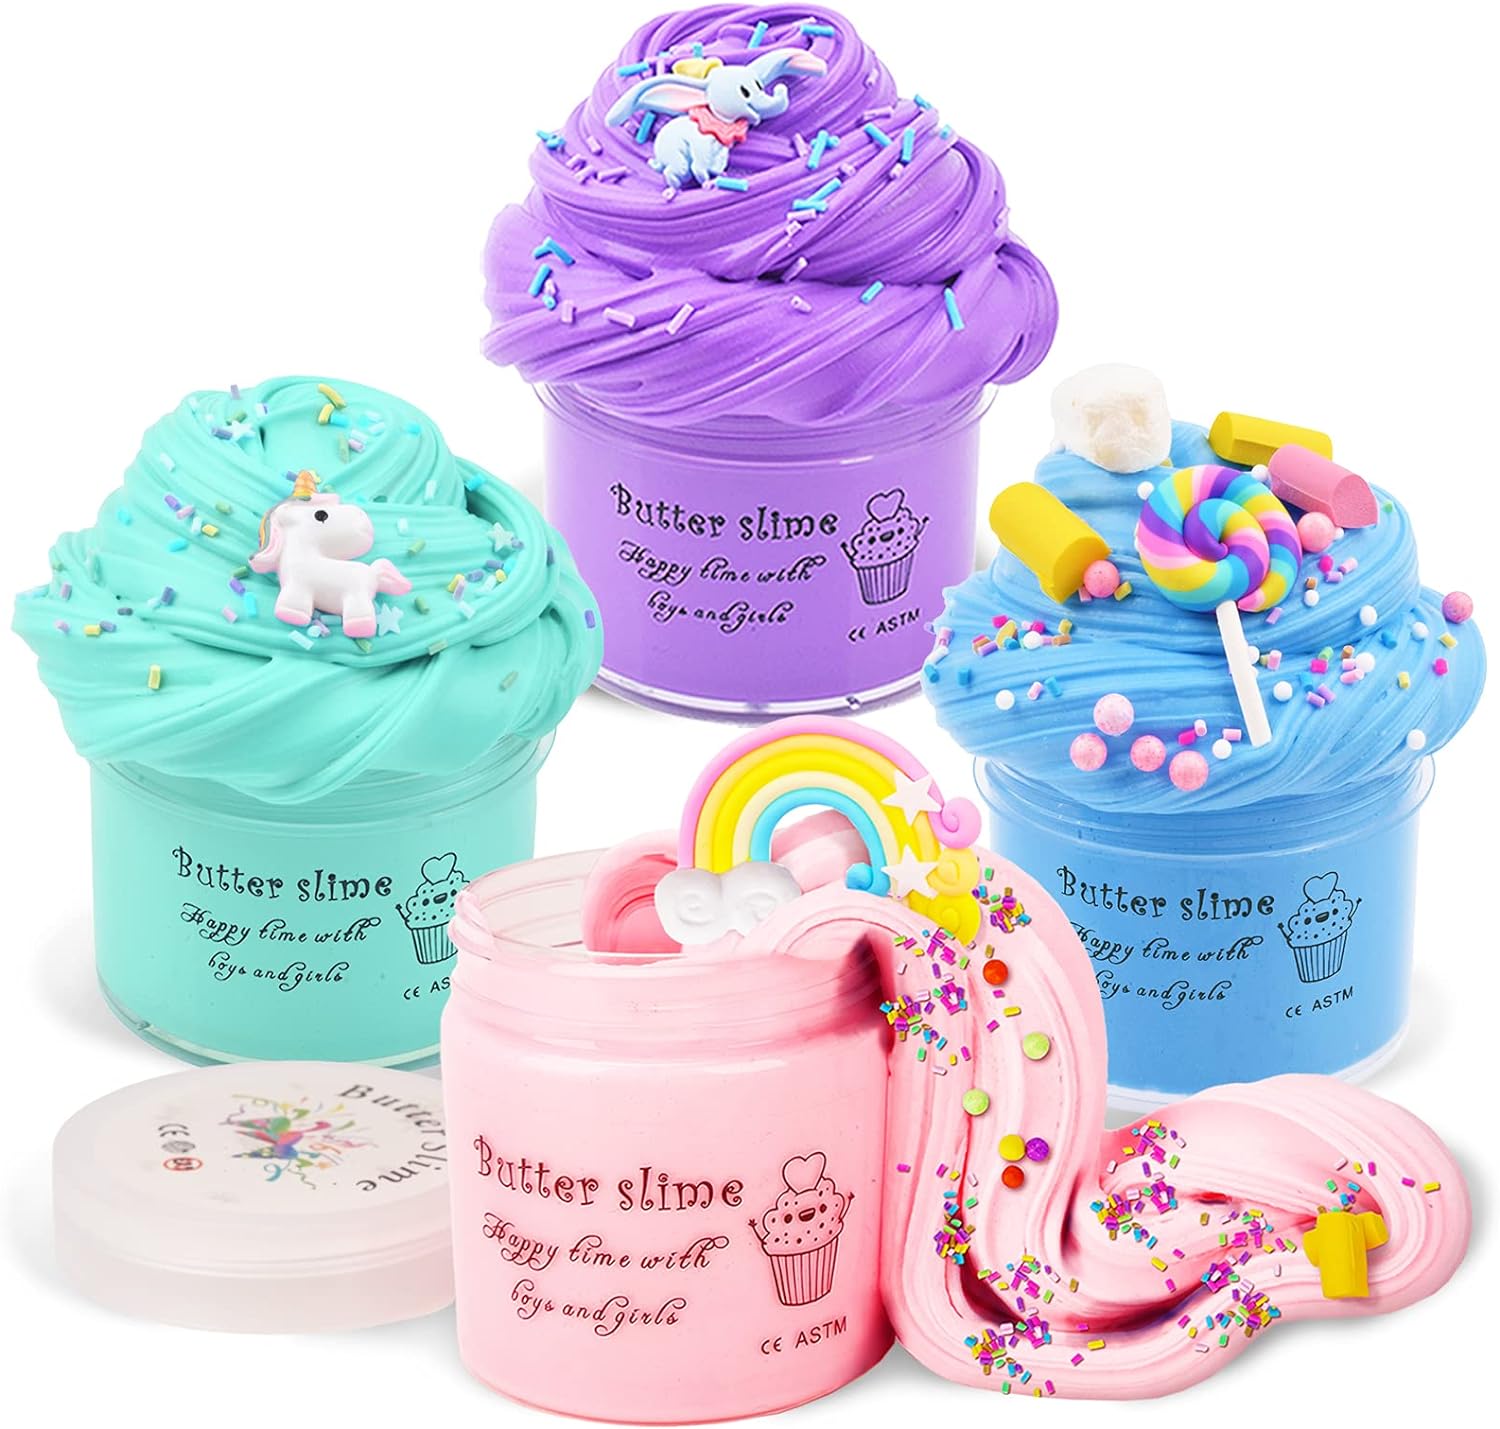 Toys Gifts for 6 7 8 9 10 Year Old Girls Boy, Kids Gift Fluffy Slime Kit Toy for Girl Age 5-12 Putty Slimes Set Craft Kits Gift for Girls 5 6 7 8 9 11 Years Old Boys Birthday Gifts Stress Toys for Kid